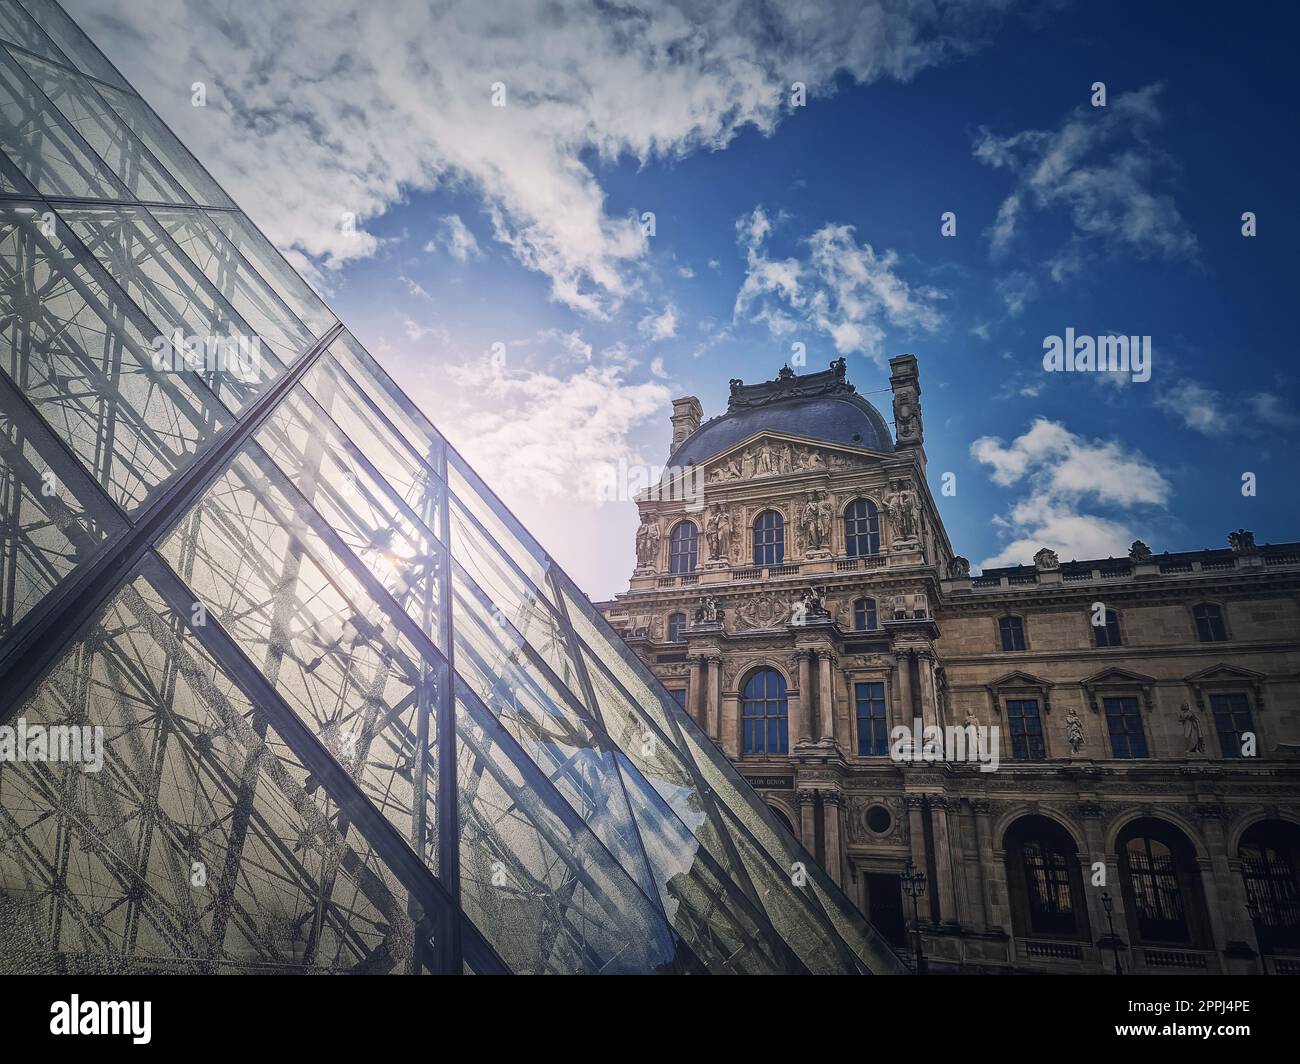 Louvre building, outdoors facade view of the famous museum palais with the modern glass pyramid in Paris, France Stock Photo